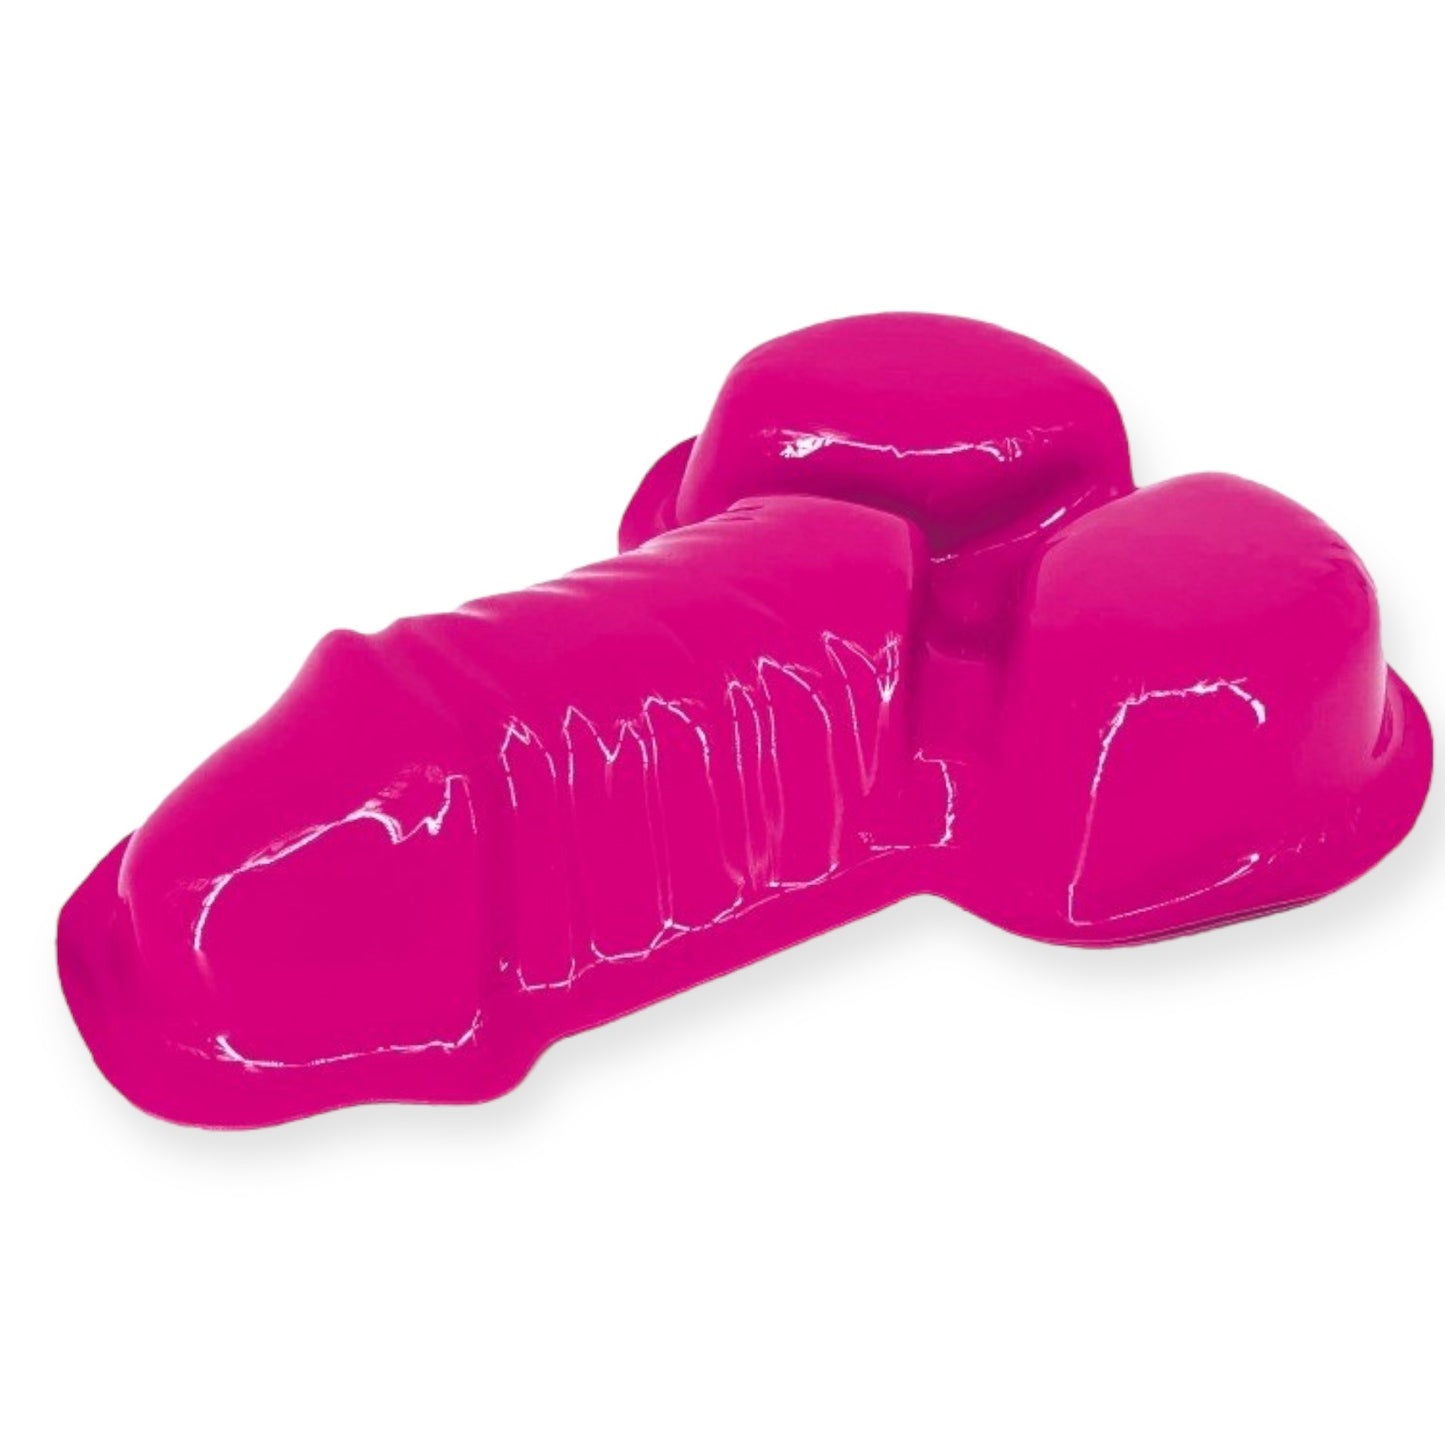 Create a Funny Pie Shaped Cake with the Pink Pie Mold - Perfect for Festive Occasions!